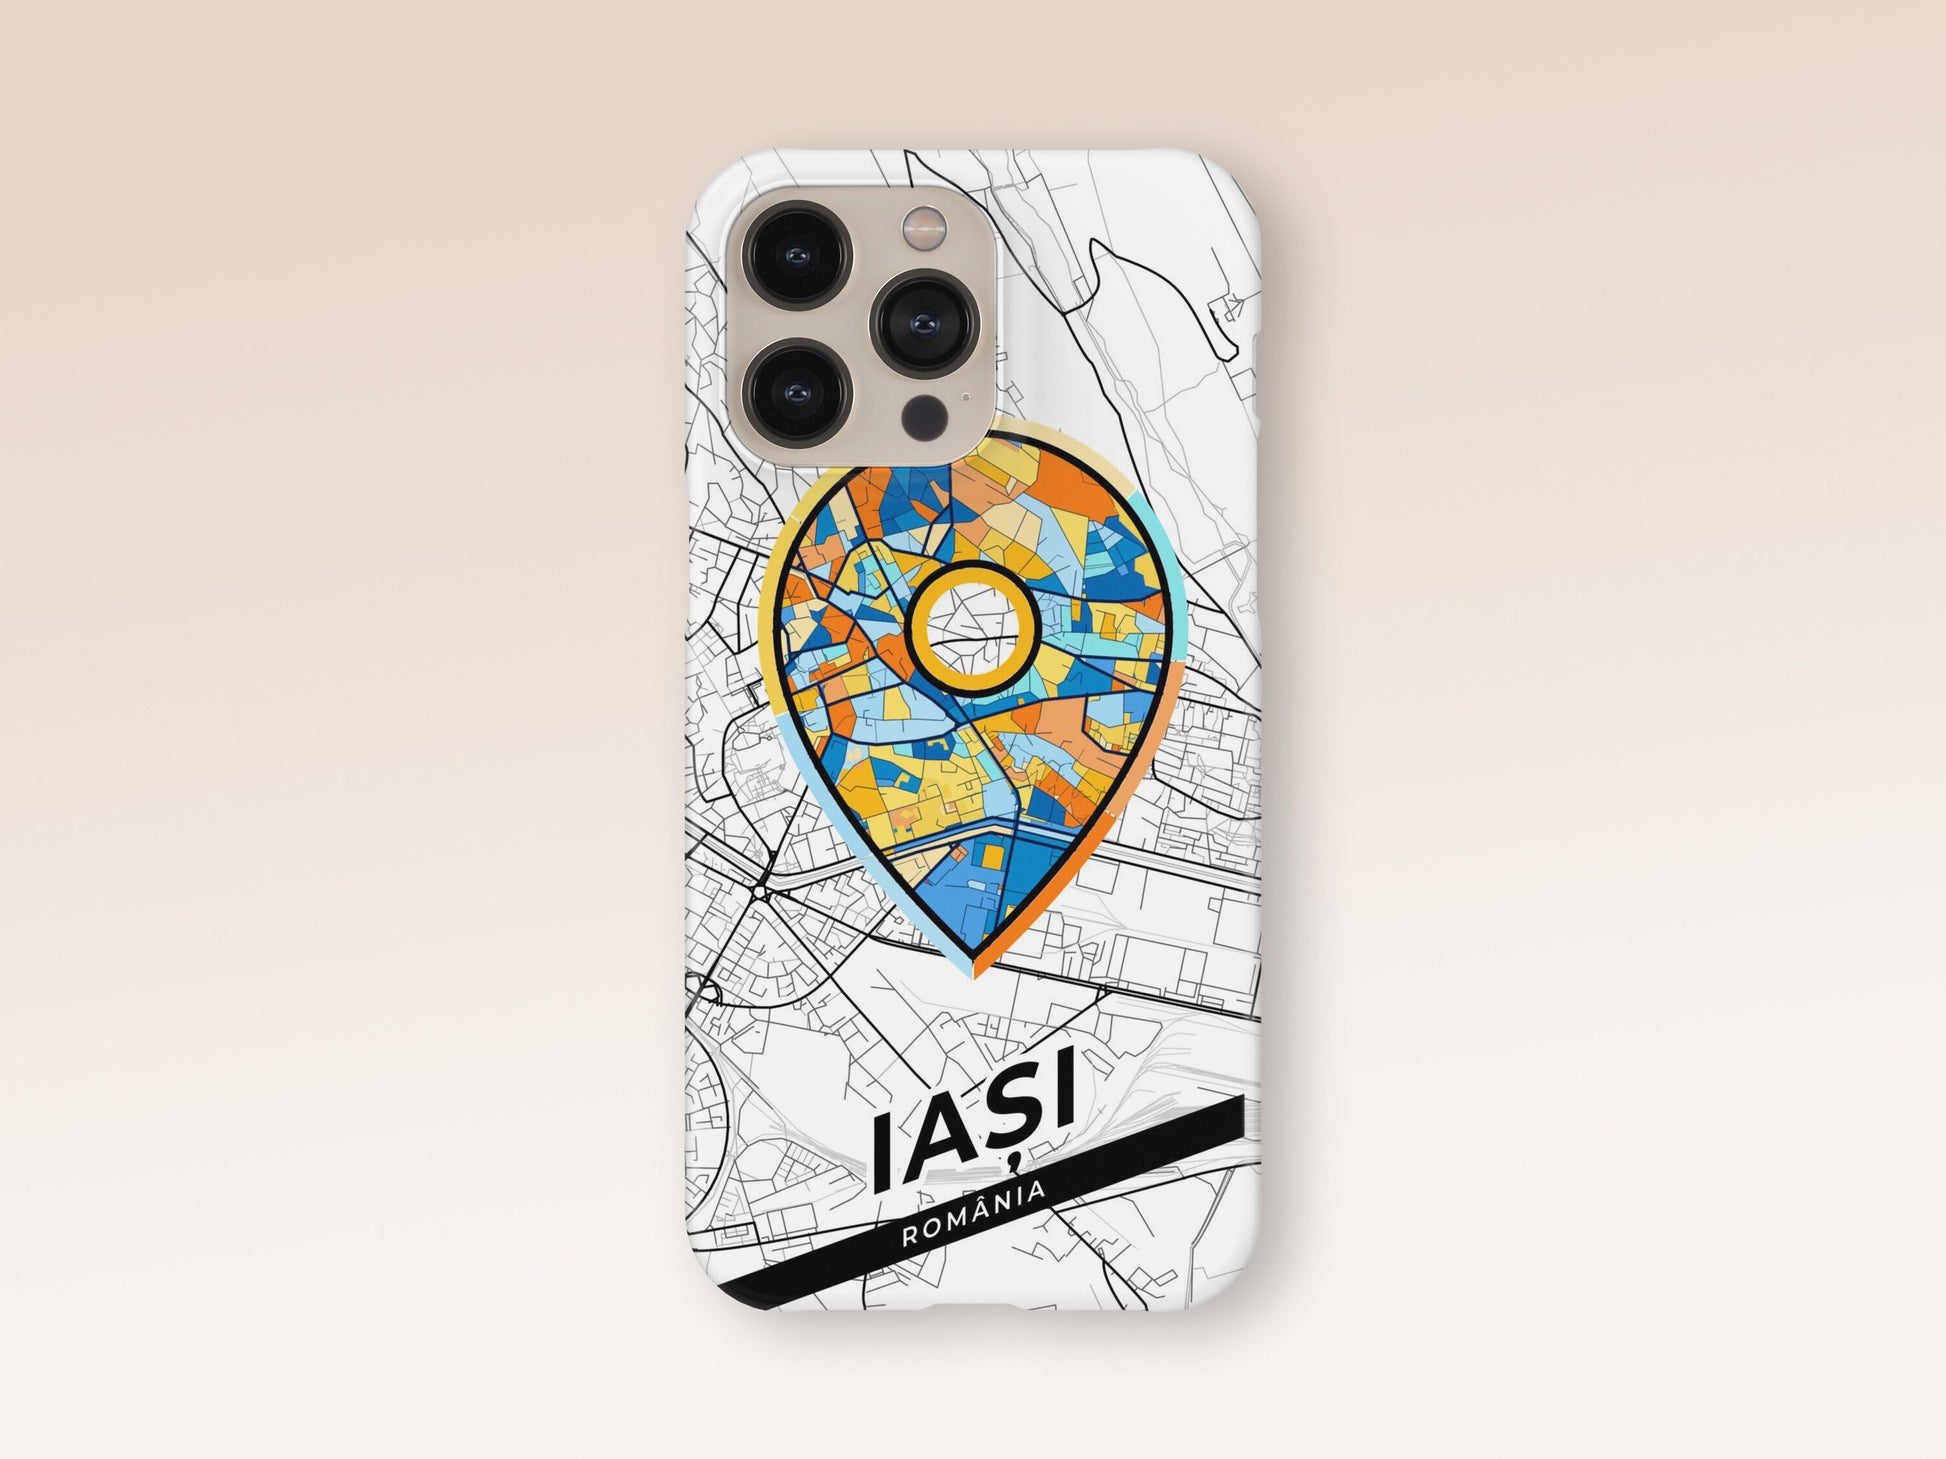 Iași Romania slim phone case with colorful icon. Birthday, wedding or housewarming gift. Couple match cases. 1